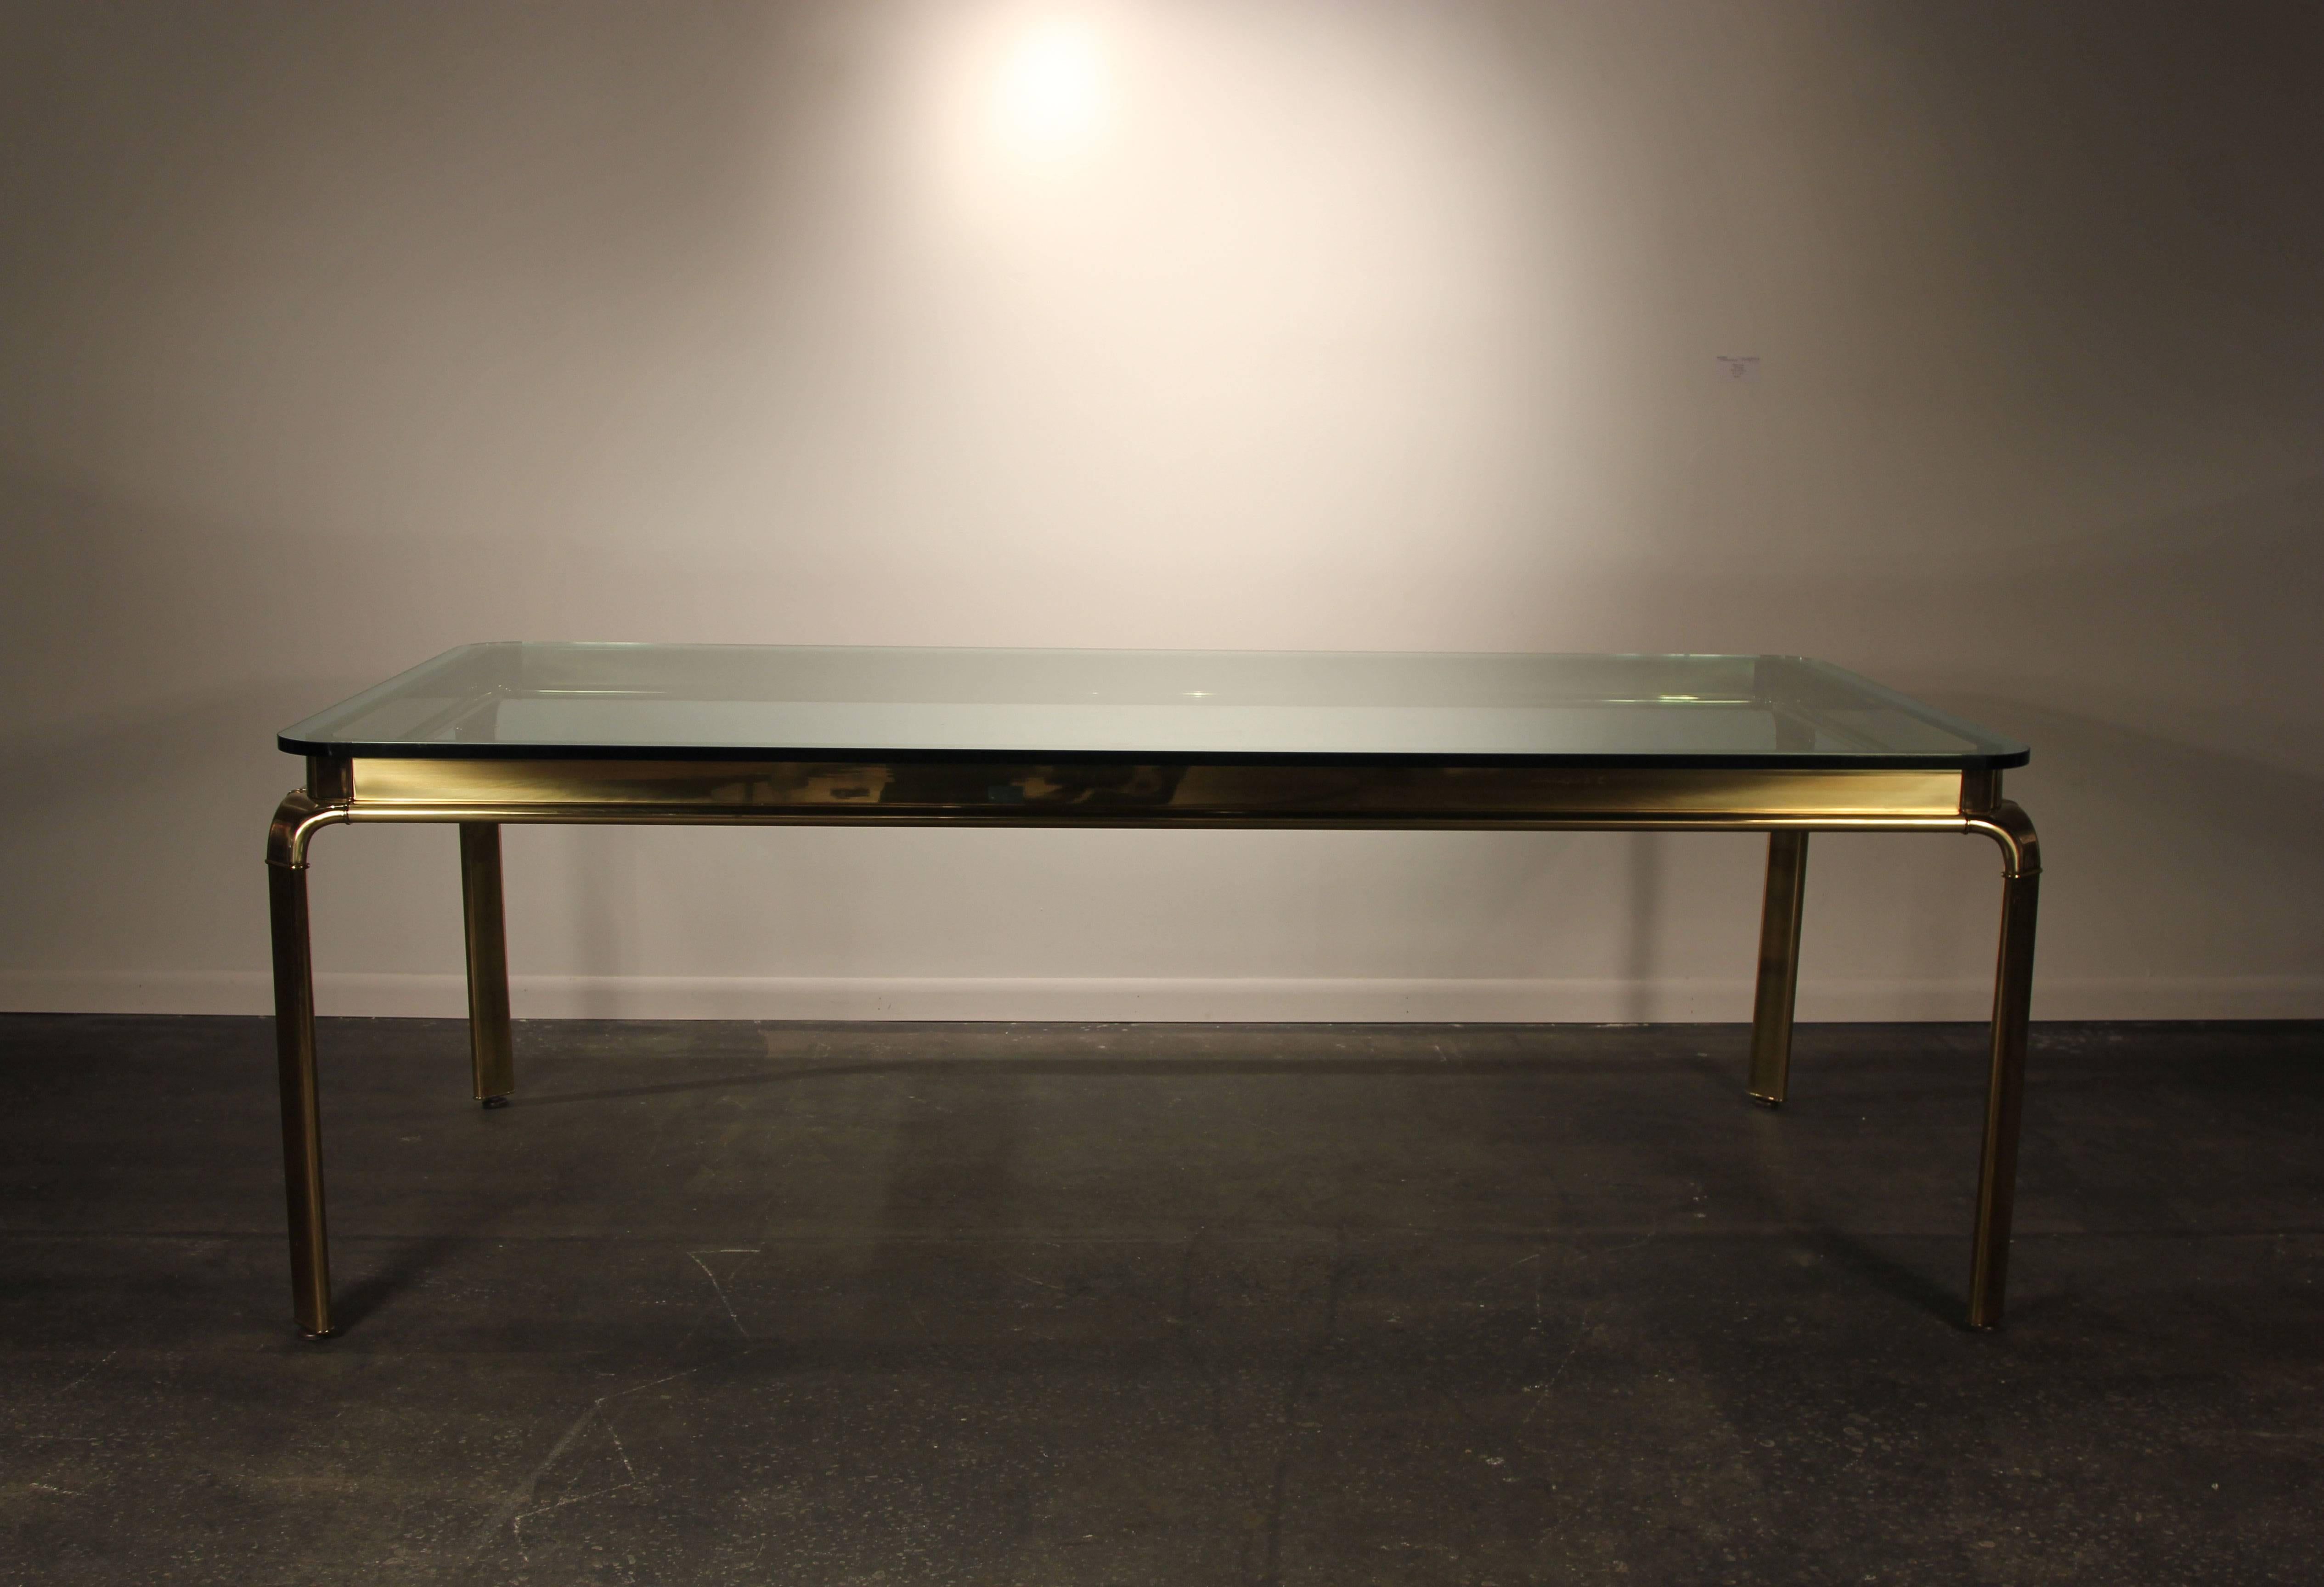 Incredible brass table by Widdicomb. With 1inch thick glass top. Radius corners. In the manner of Mastercraft, rare and unique beautiful dining table.